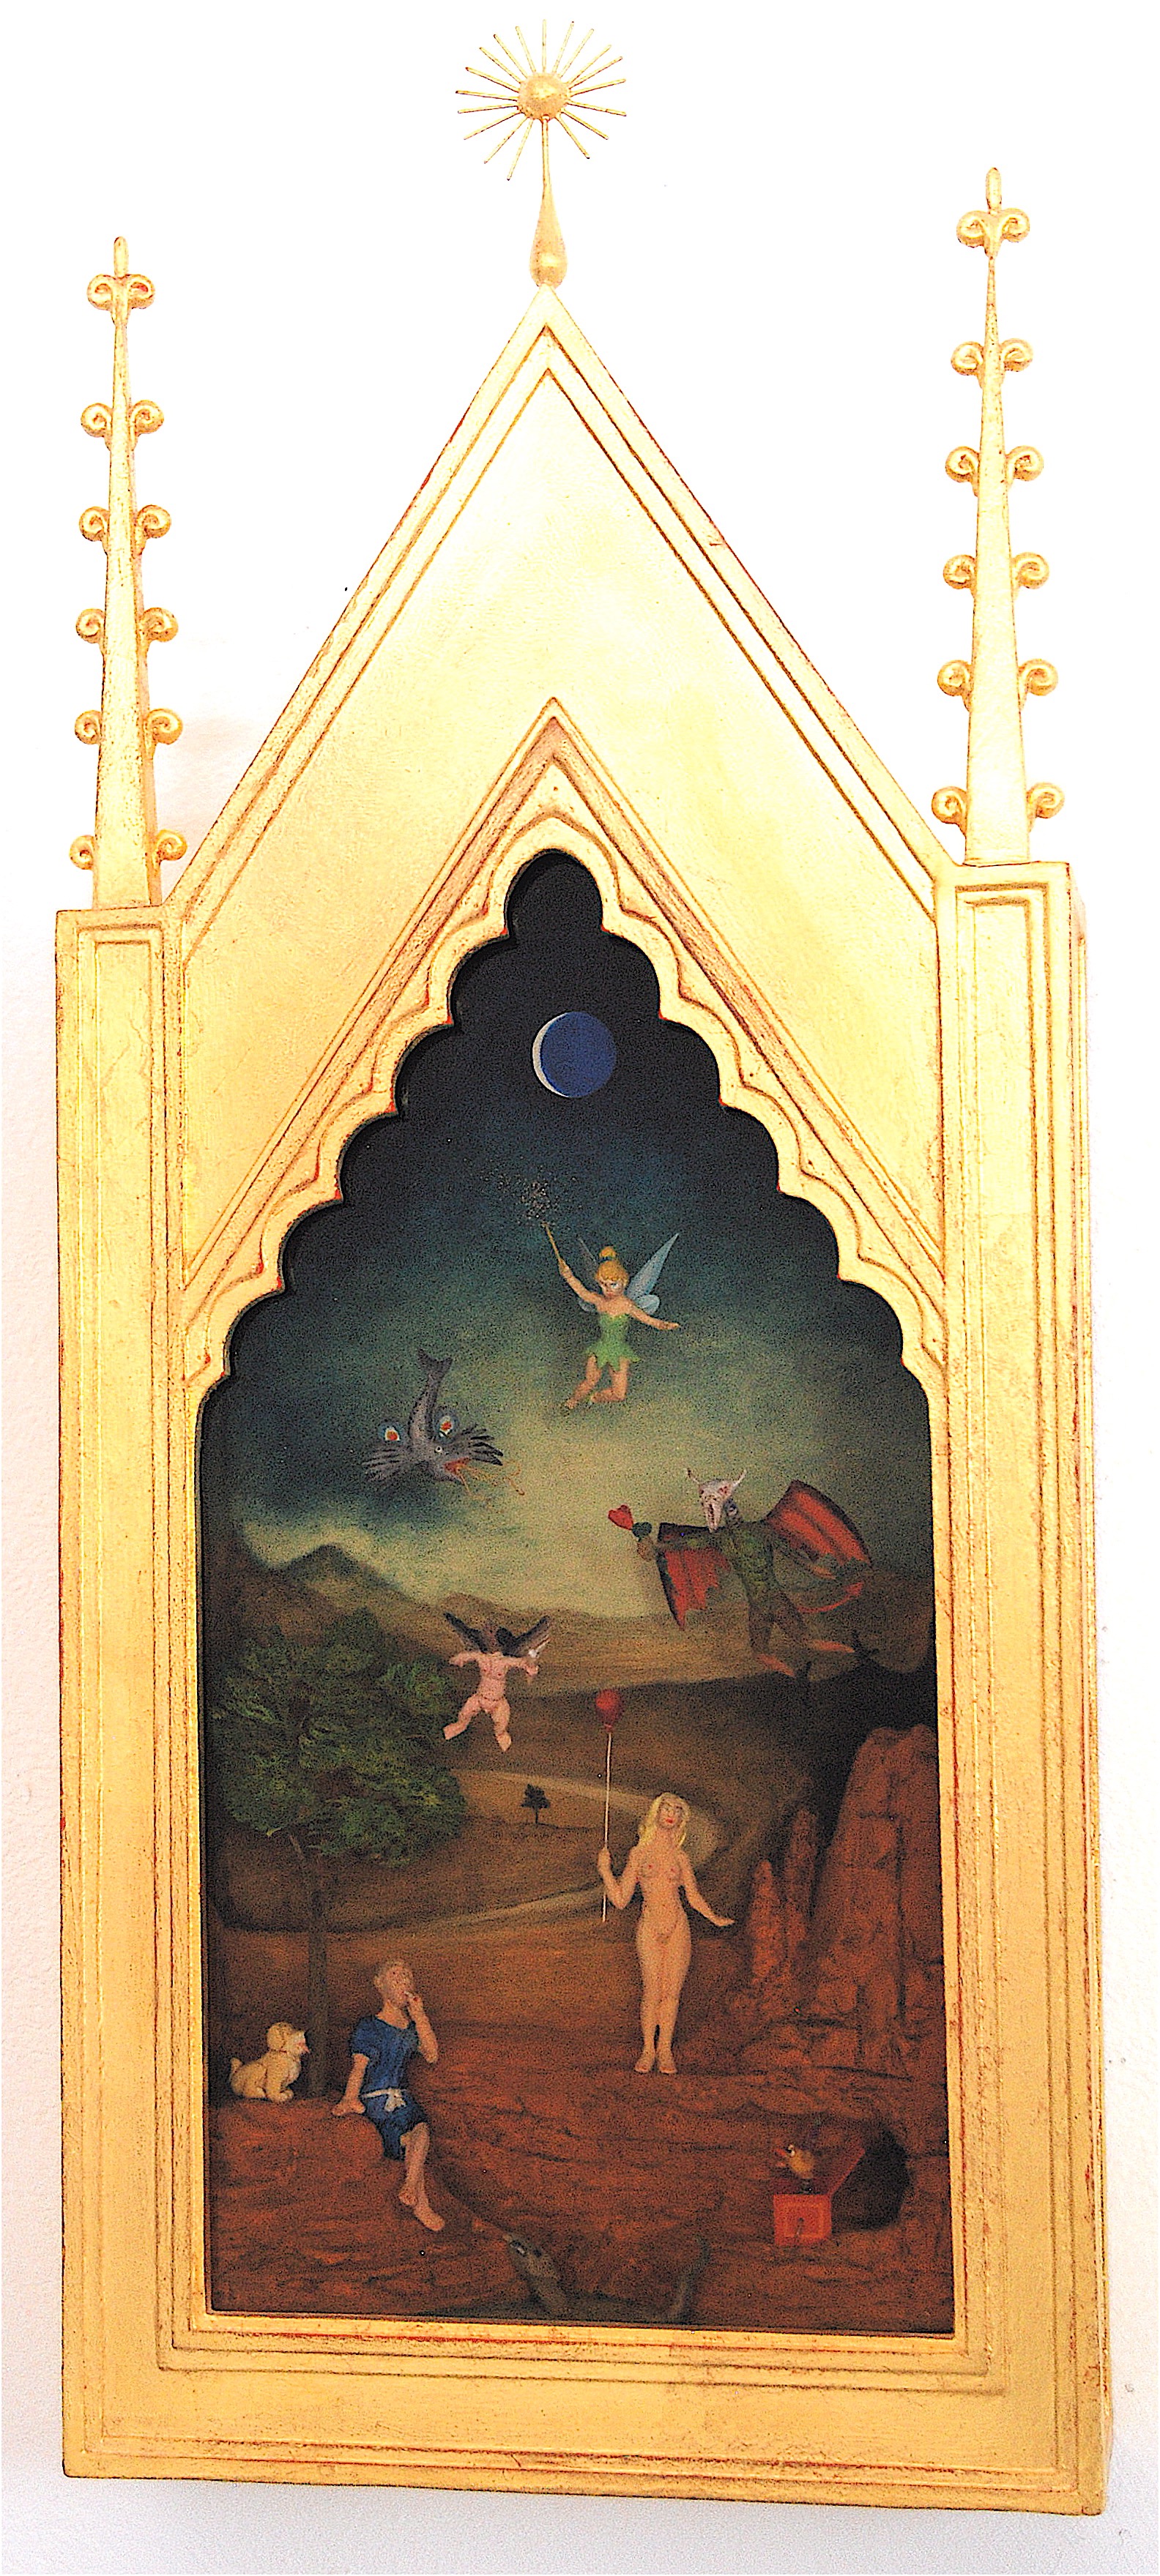 Thomas Coffin - The Temptation of Saint Anthony, 23"h x 10"w x 2"d, mixed media 3-d diorama encased in acrylic resin, handmade wood frame, 23 kt. gold leaf